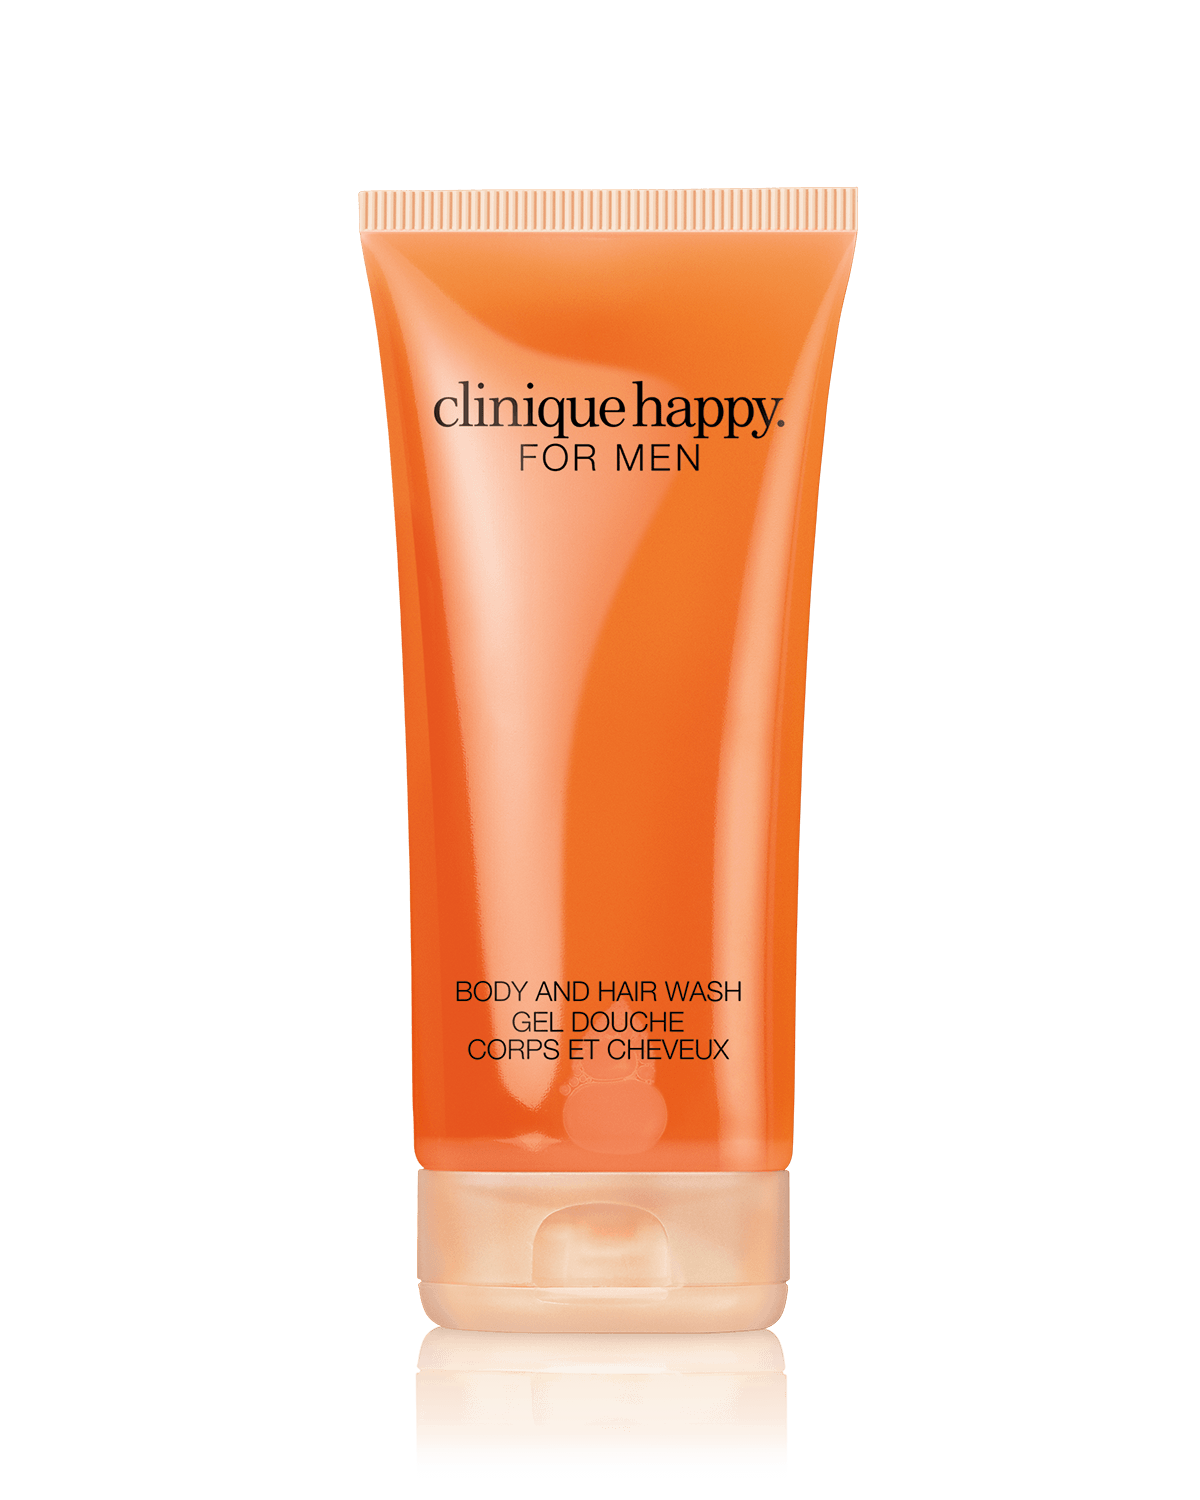 Clinique Happy for Men Body and Hair Wash